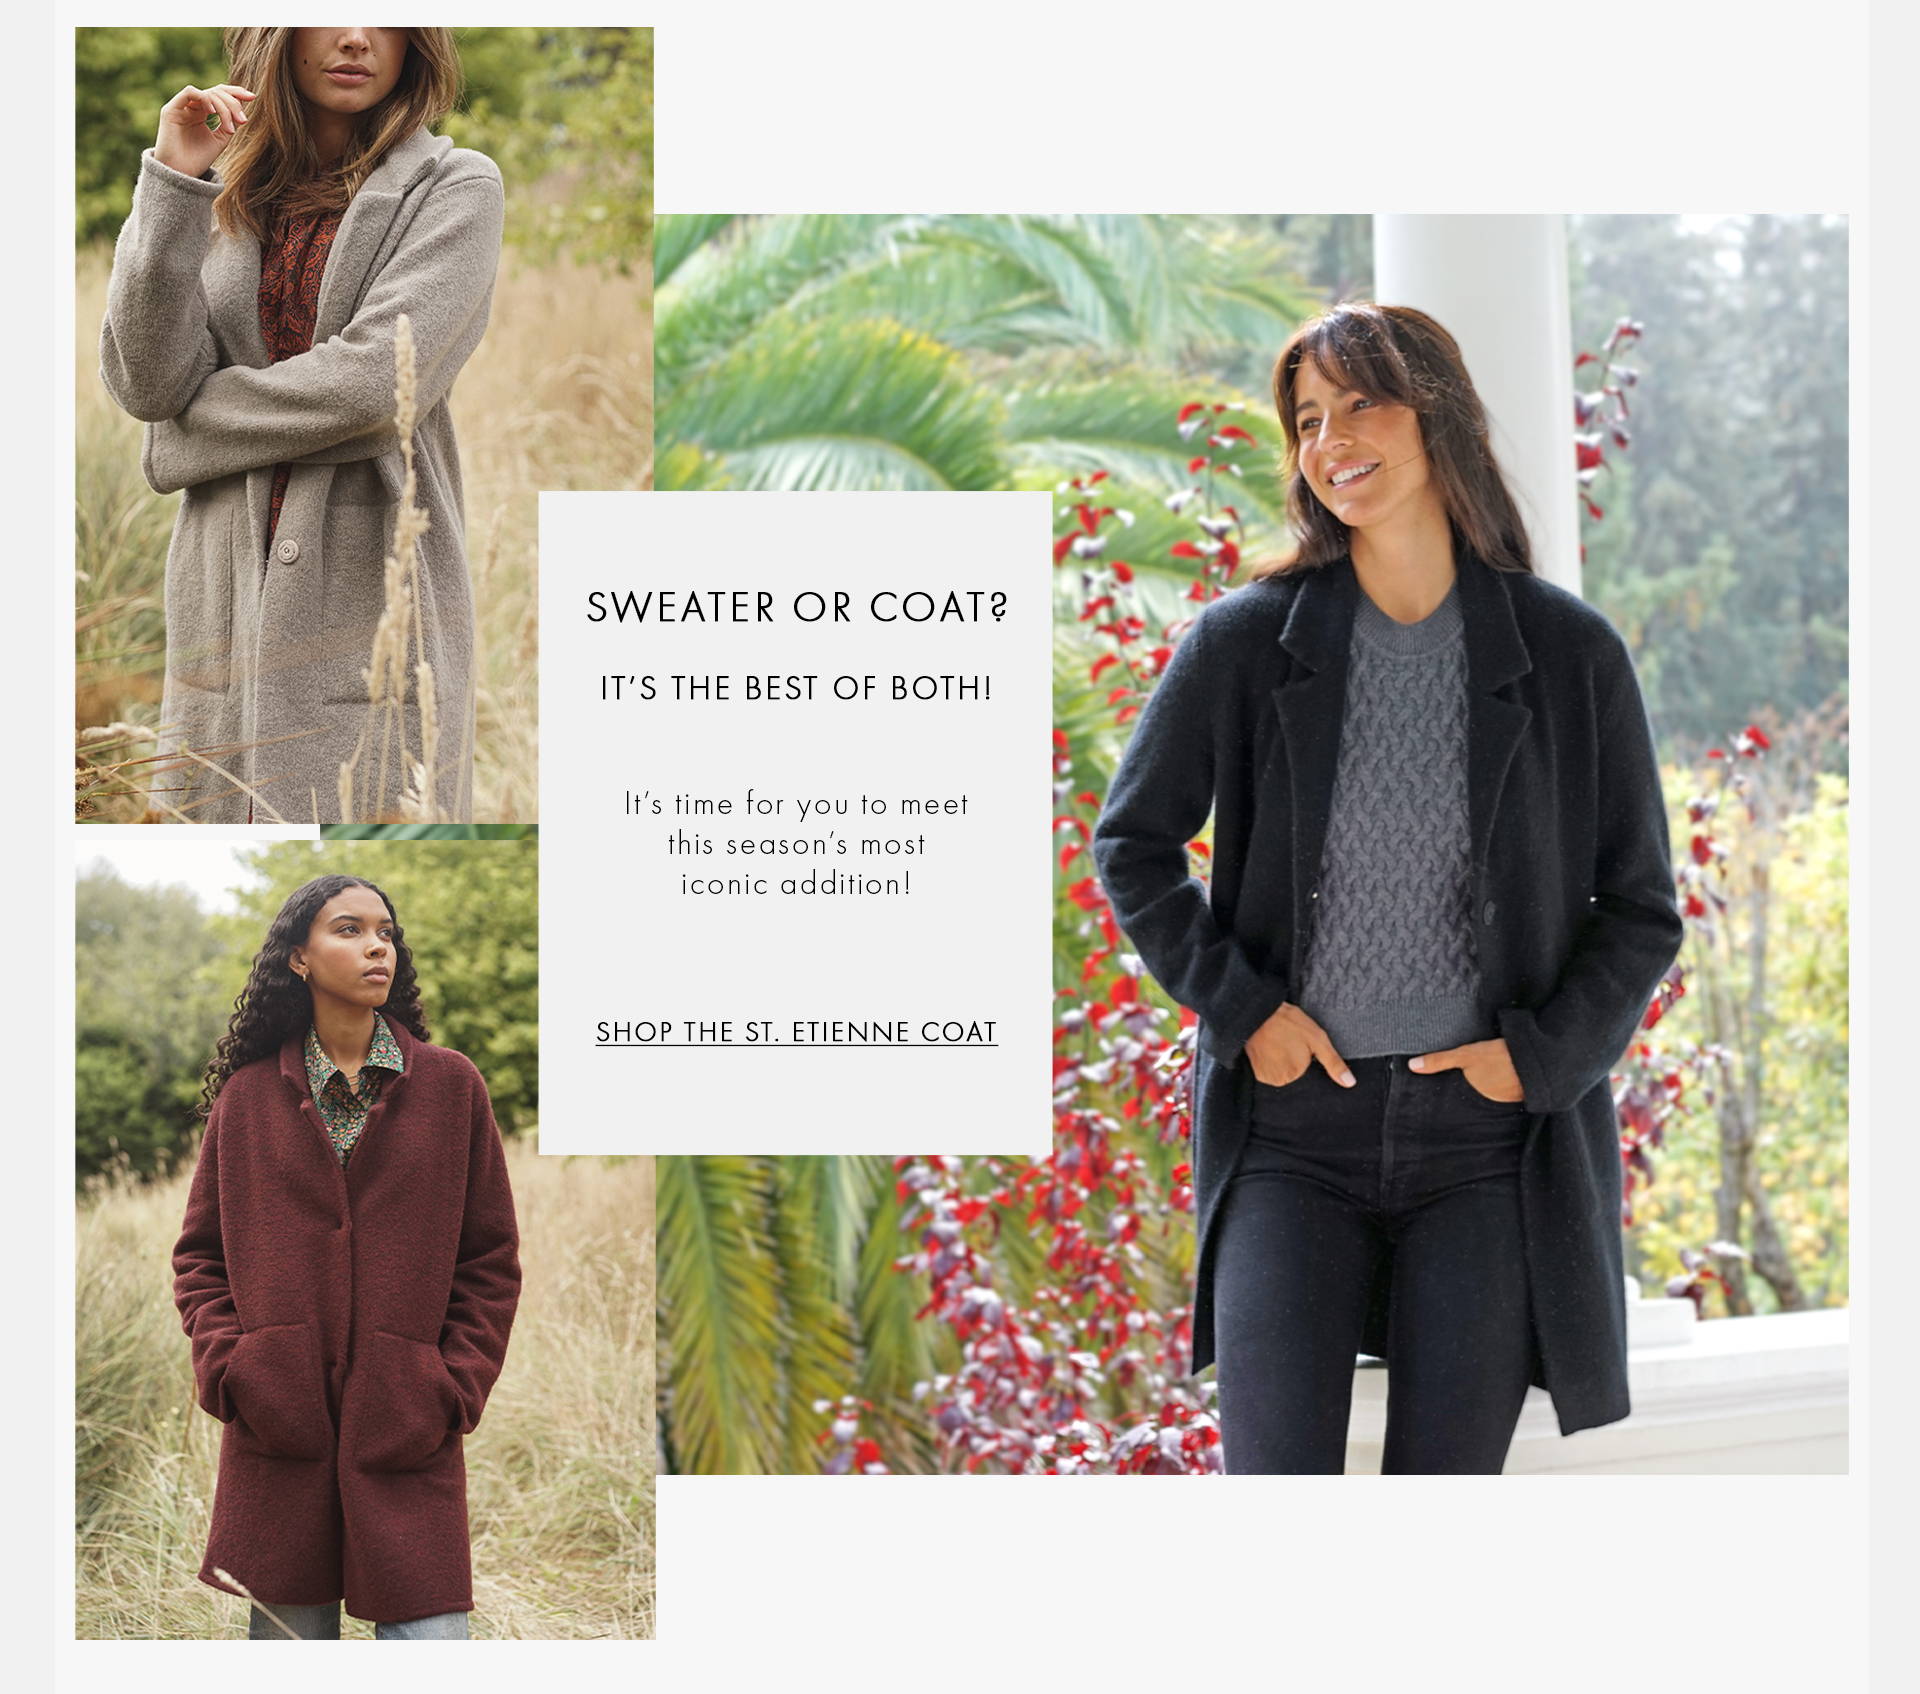 Sweater or coat? It's the best of both! It's time for you to meet this season's most iconic addition! Shop the st. etienne coat texts on the images with three female models wearing a grey coat, a red coat and a black coat with a grey top.